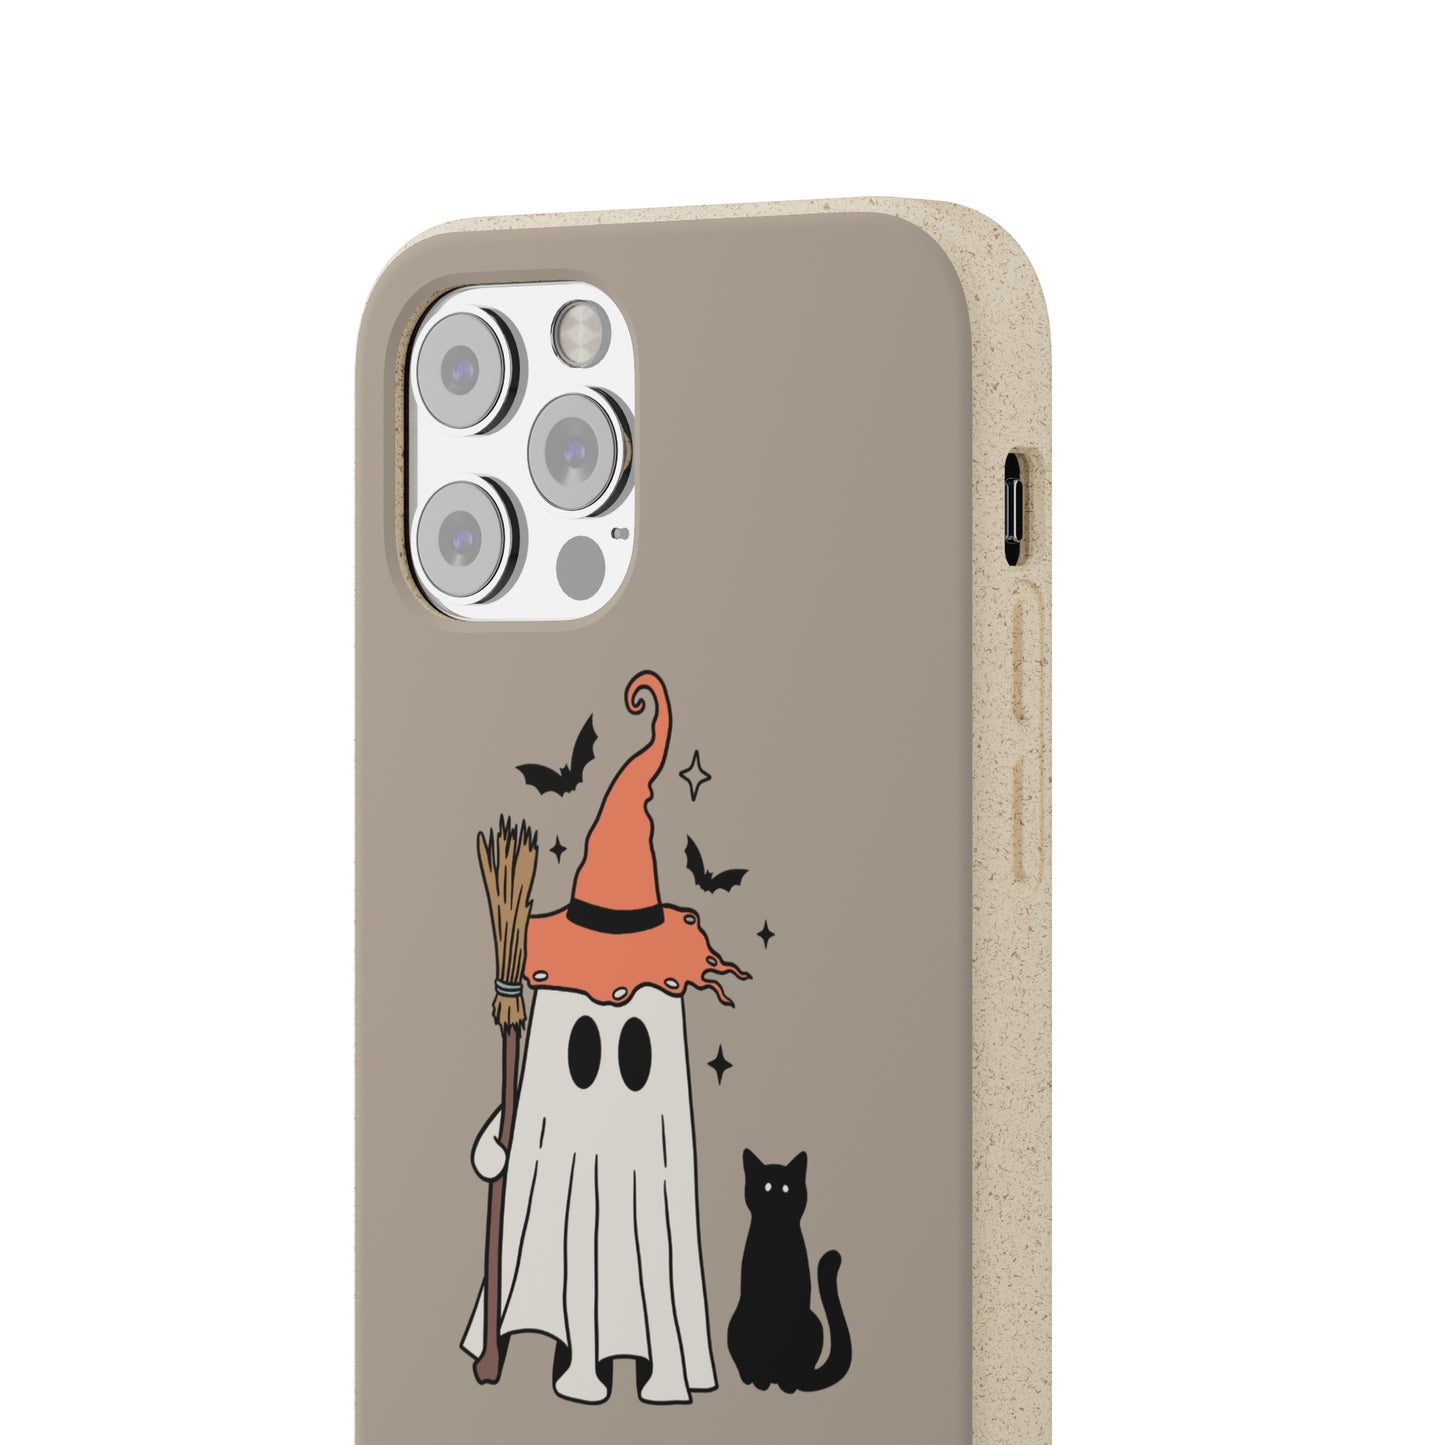 Stay Spooky | Plant-Based Biodegradable Phone Case